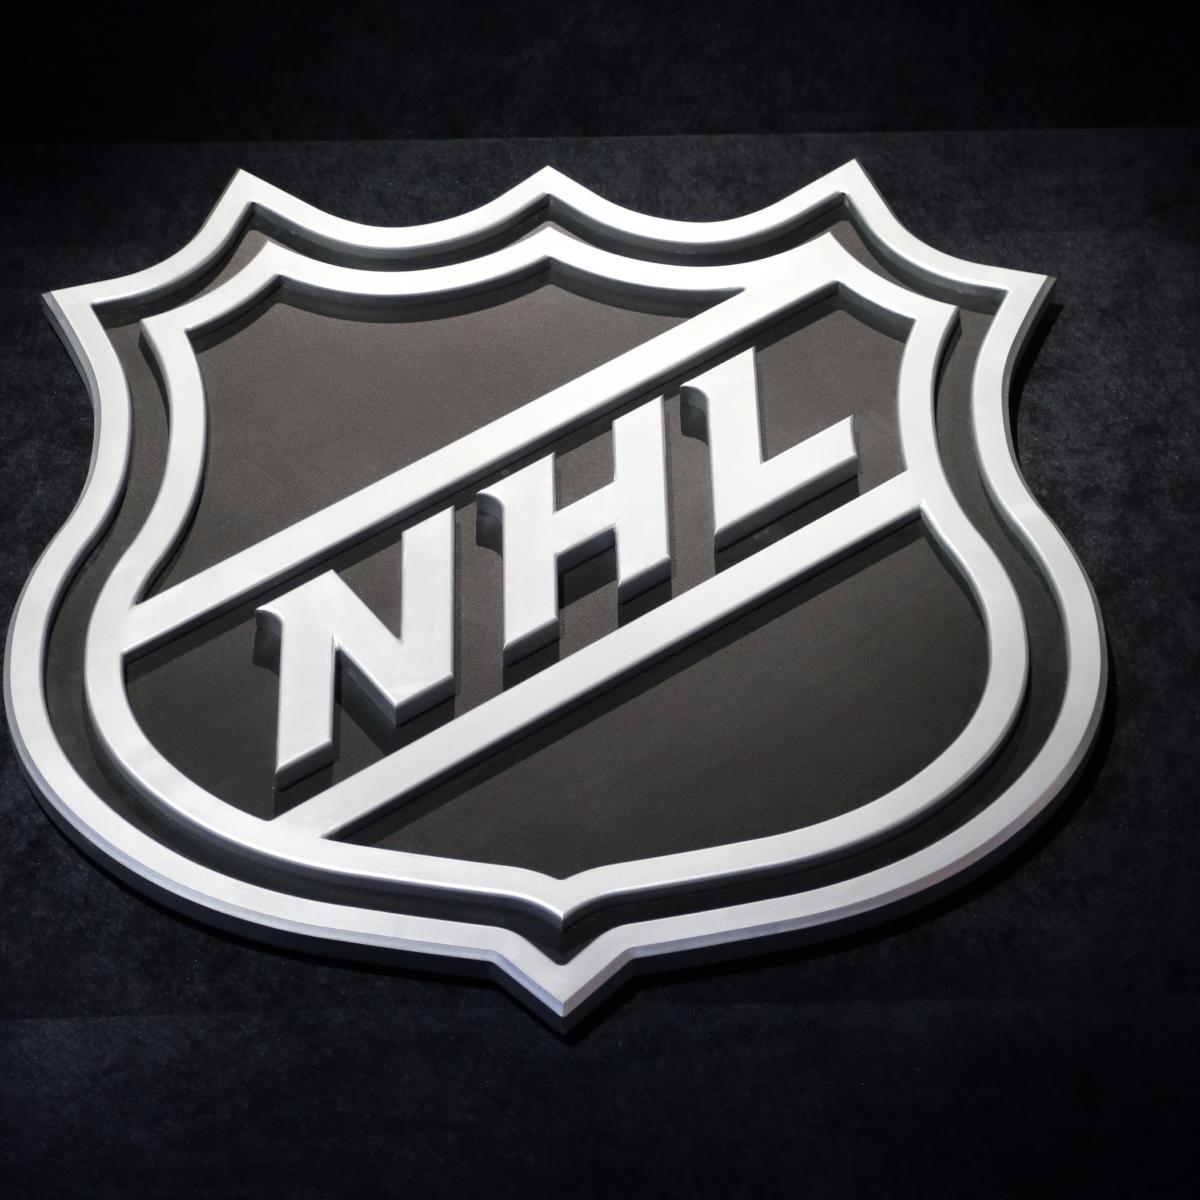 NHL Postpones 2020 Draft, Scouting Combine, Awards Show Because of